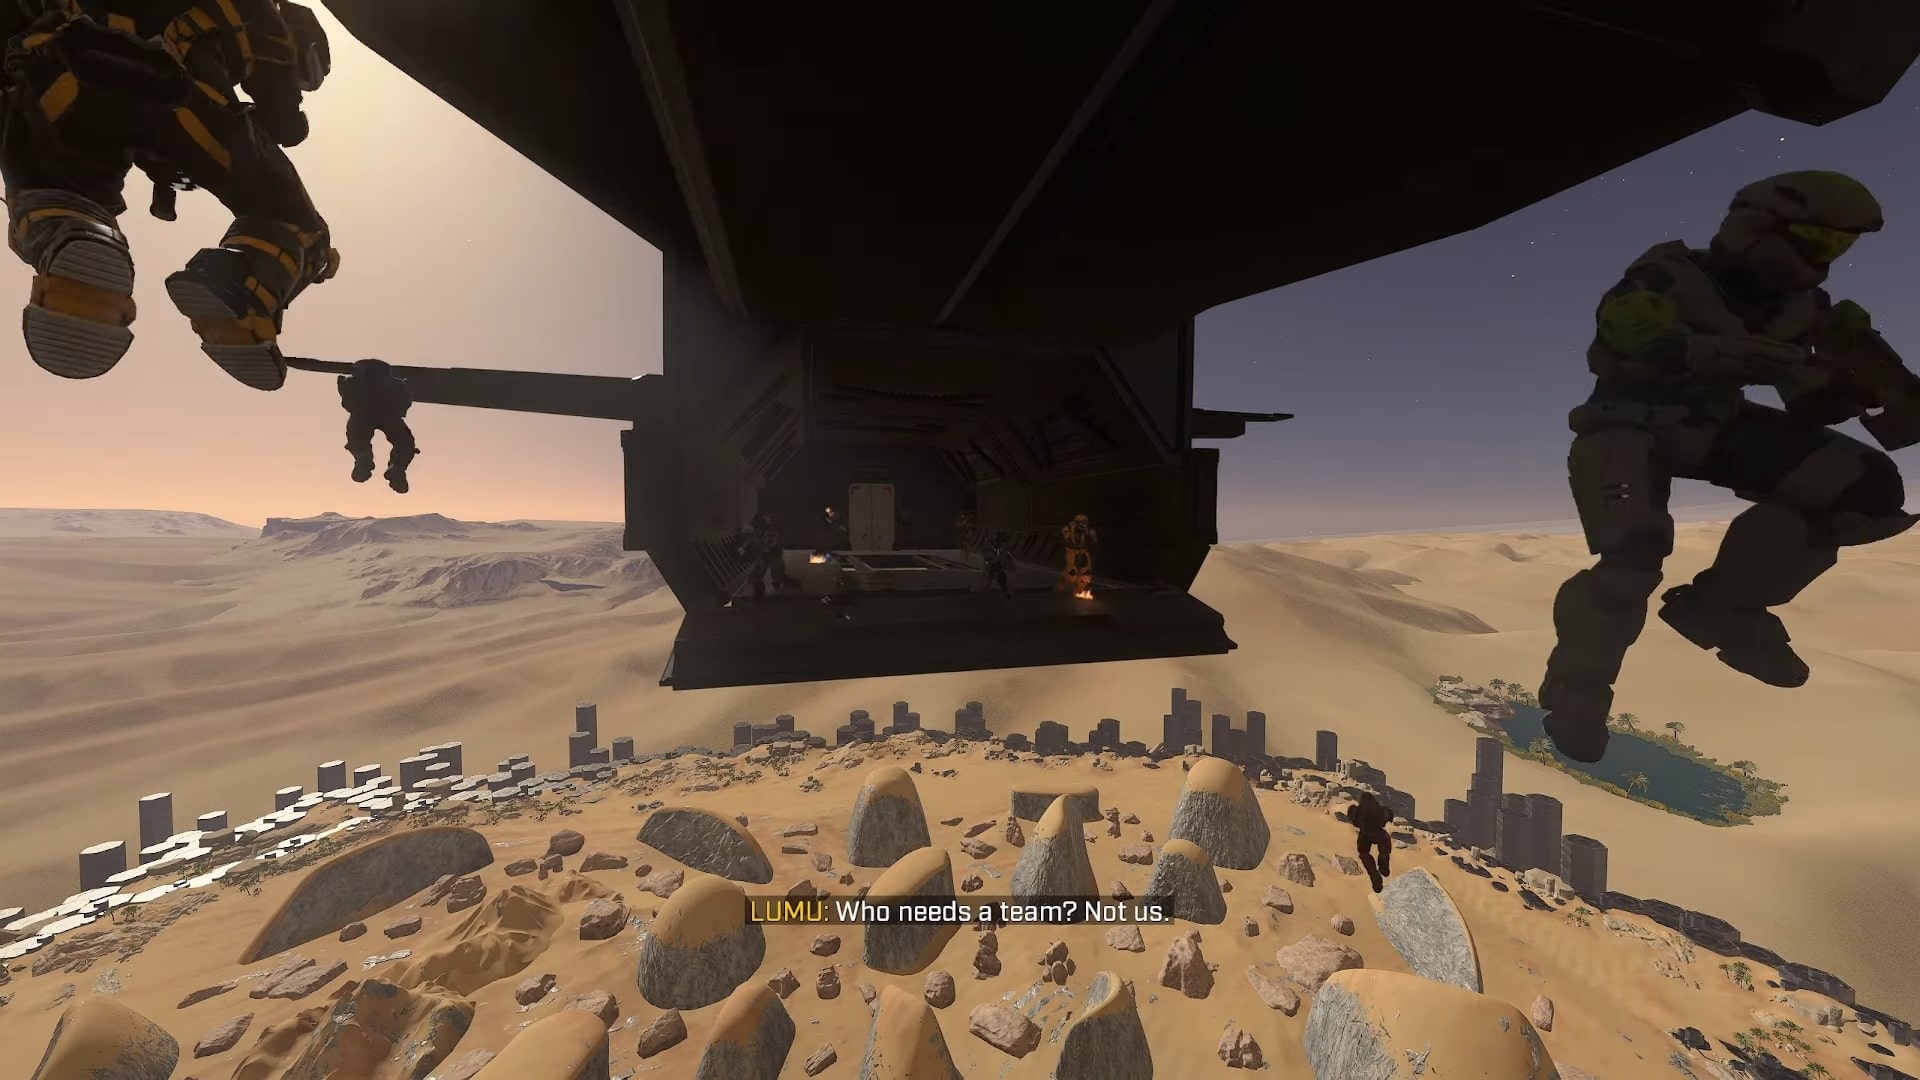 Players jumping out of the drop ship in Halo's Battle Royale game mode.